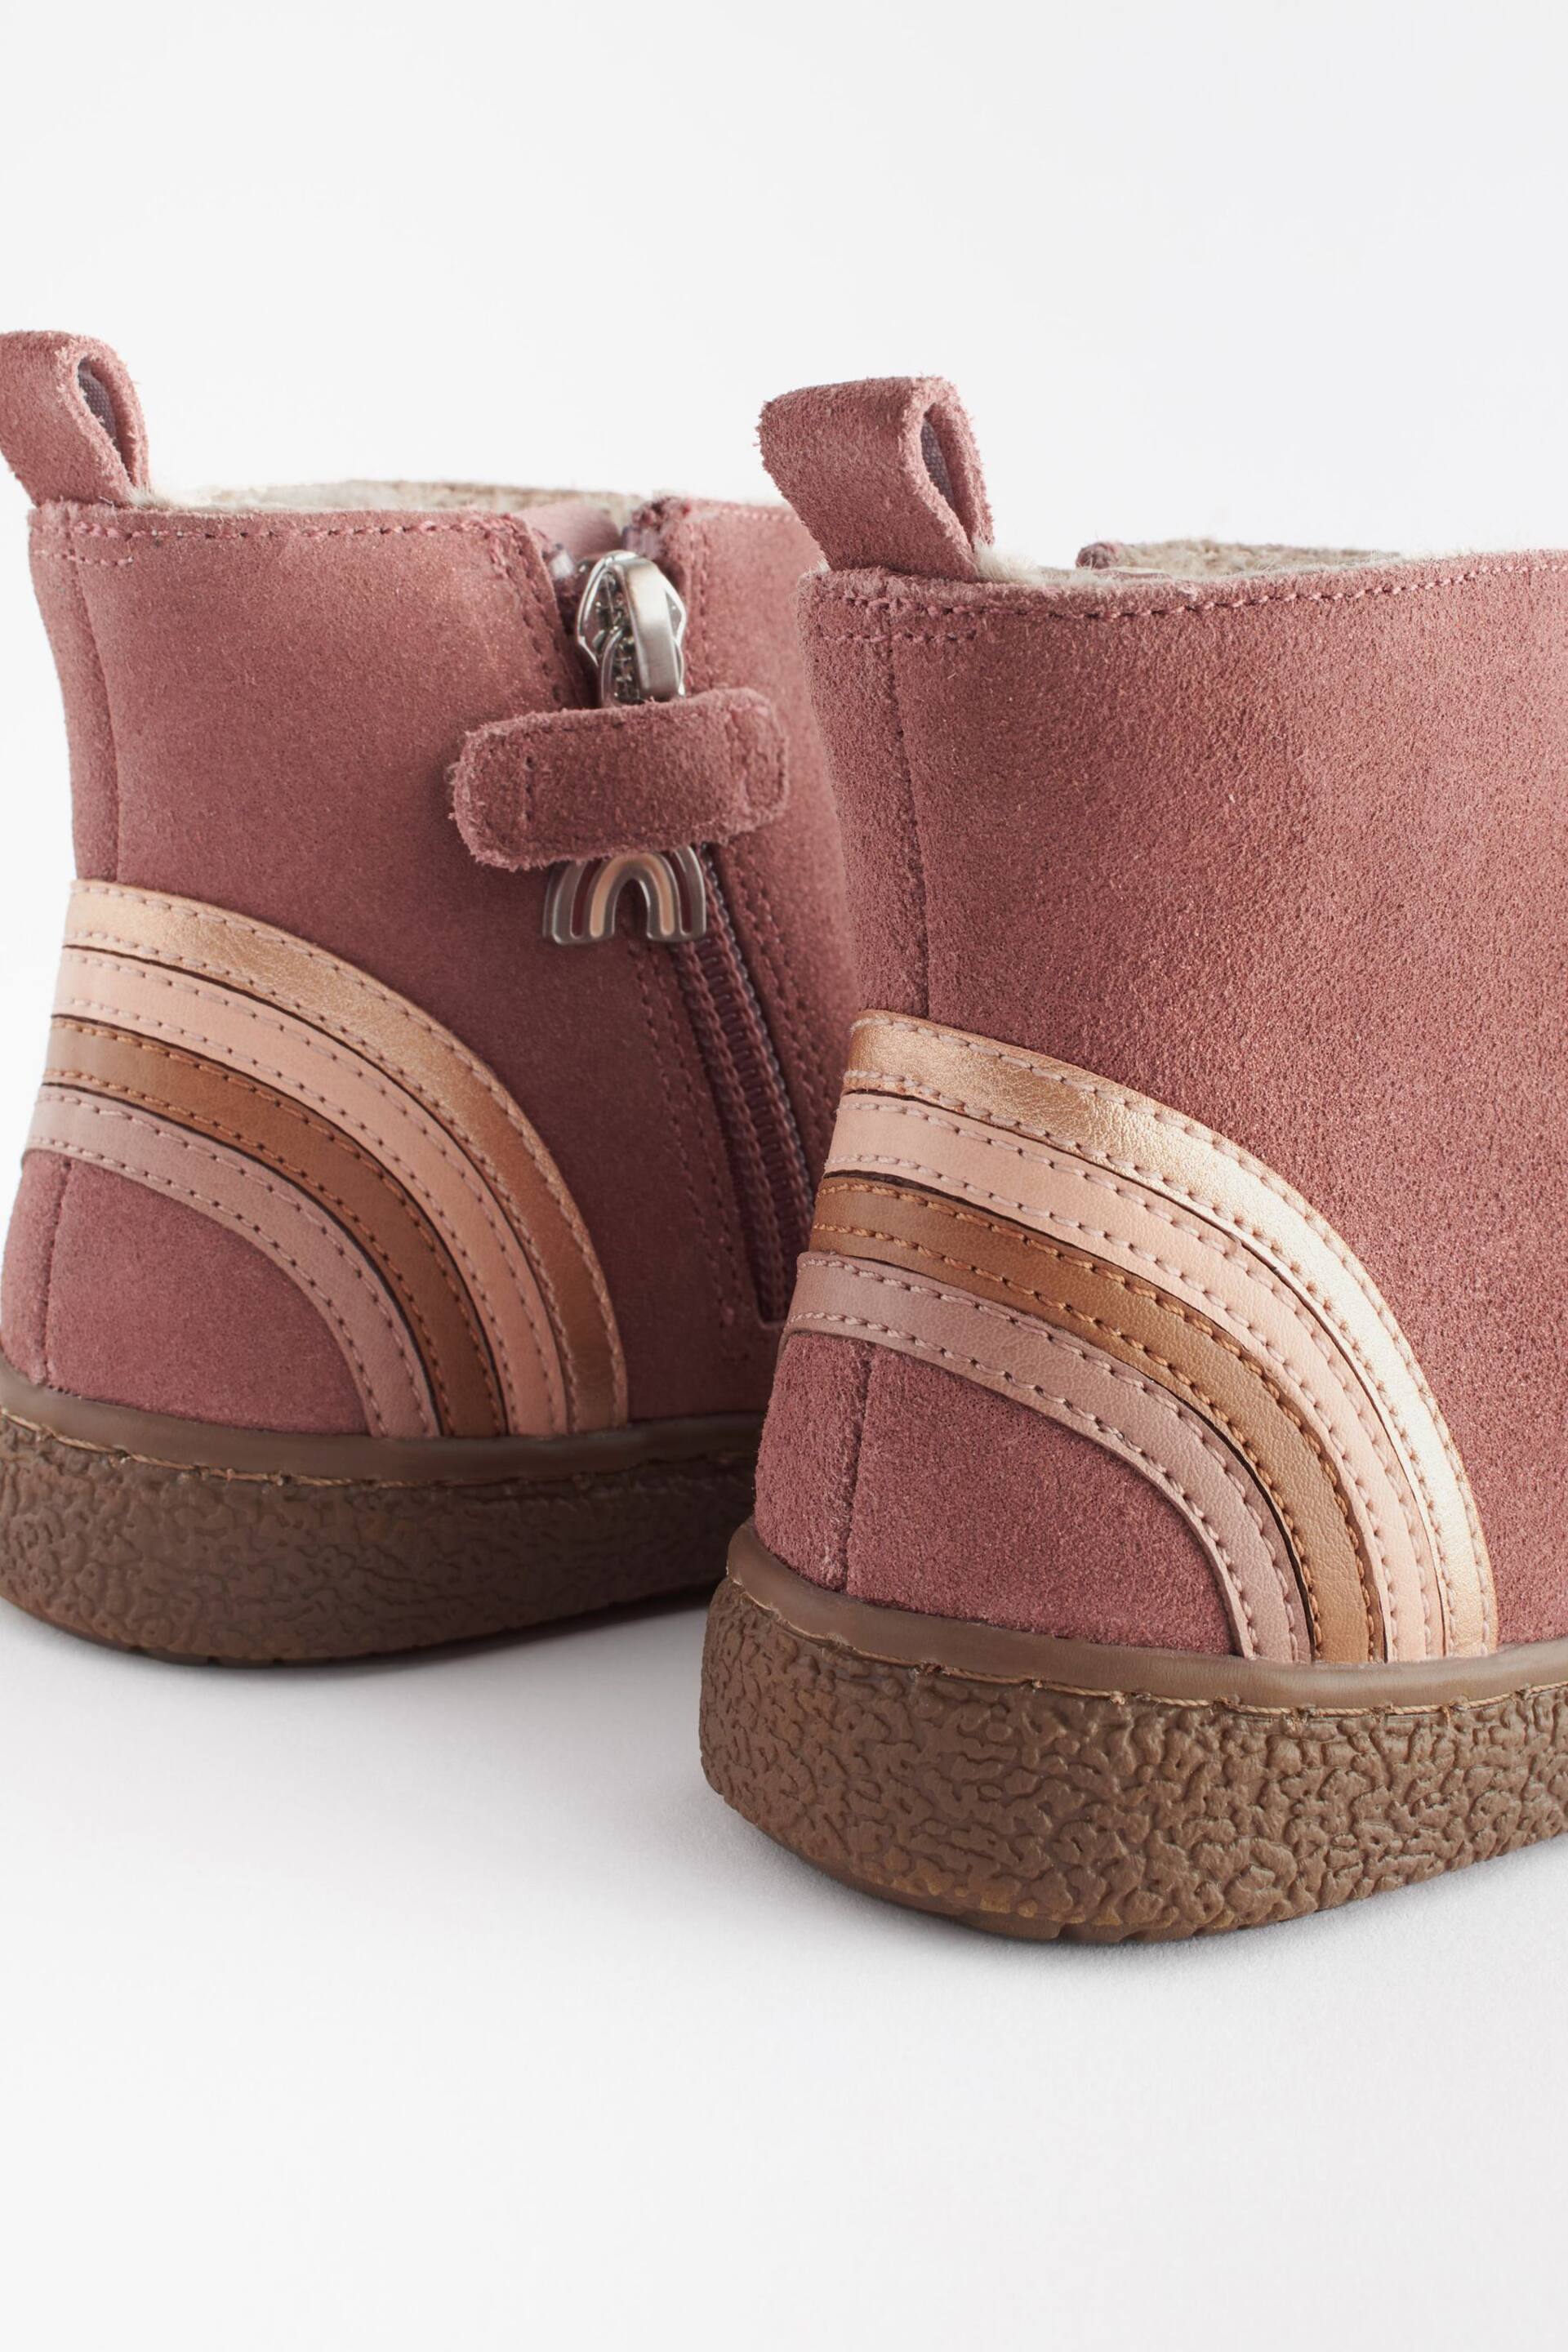 Pink Wide Fit (G) Suede Chelsea Boots - Image 4 of 5